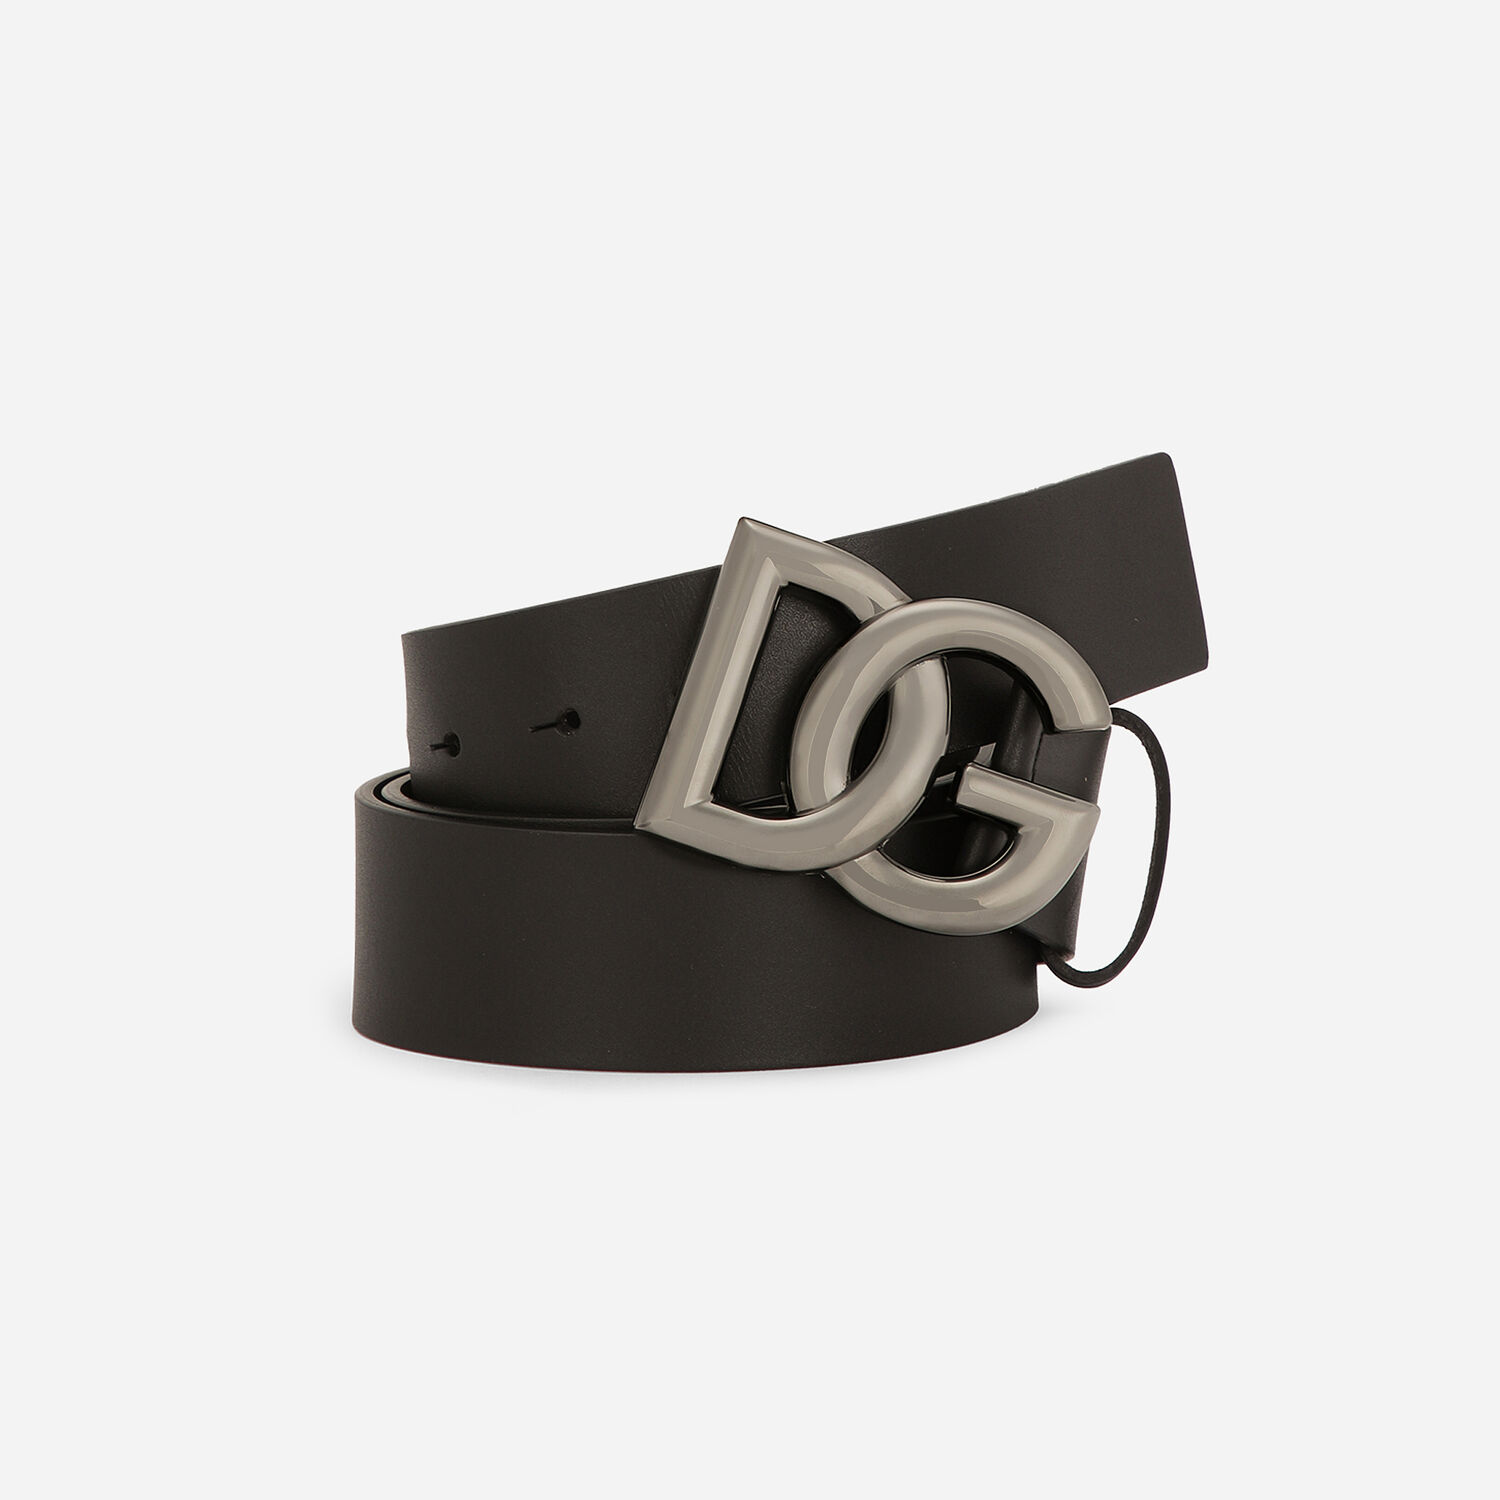 Lux leather belt with | DG Dolce&Gabbana® Black logo crossover buckle US in for